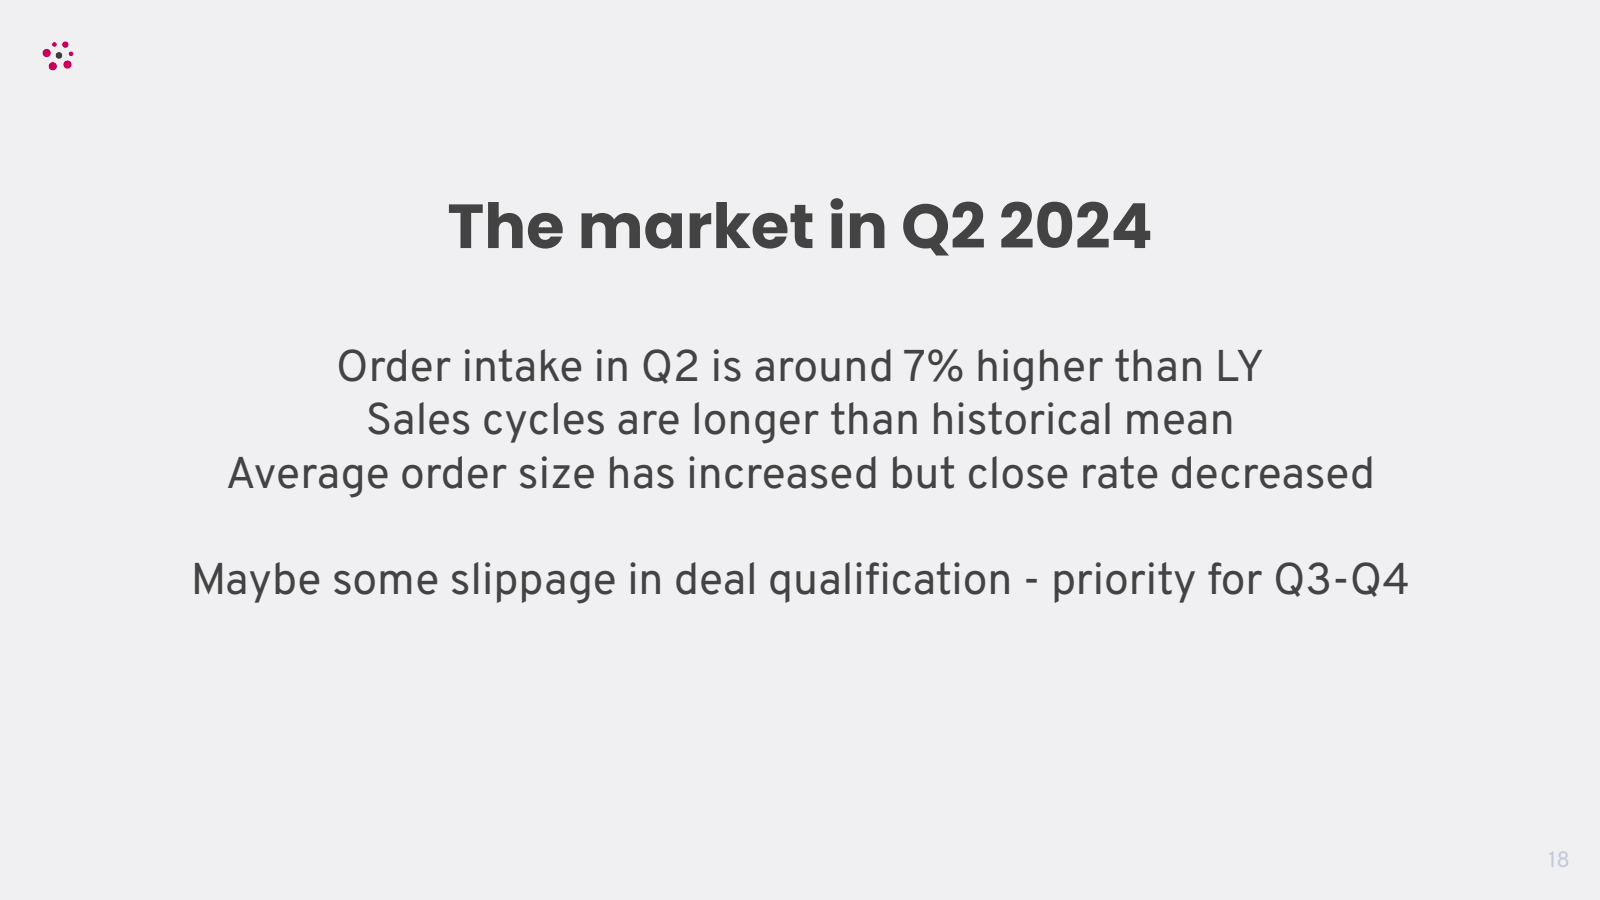 The market in Q2 202